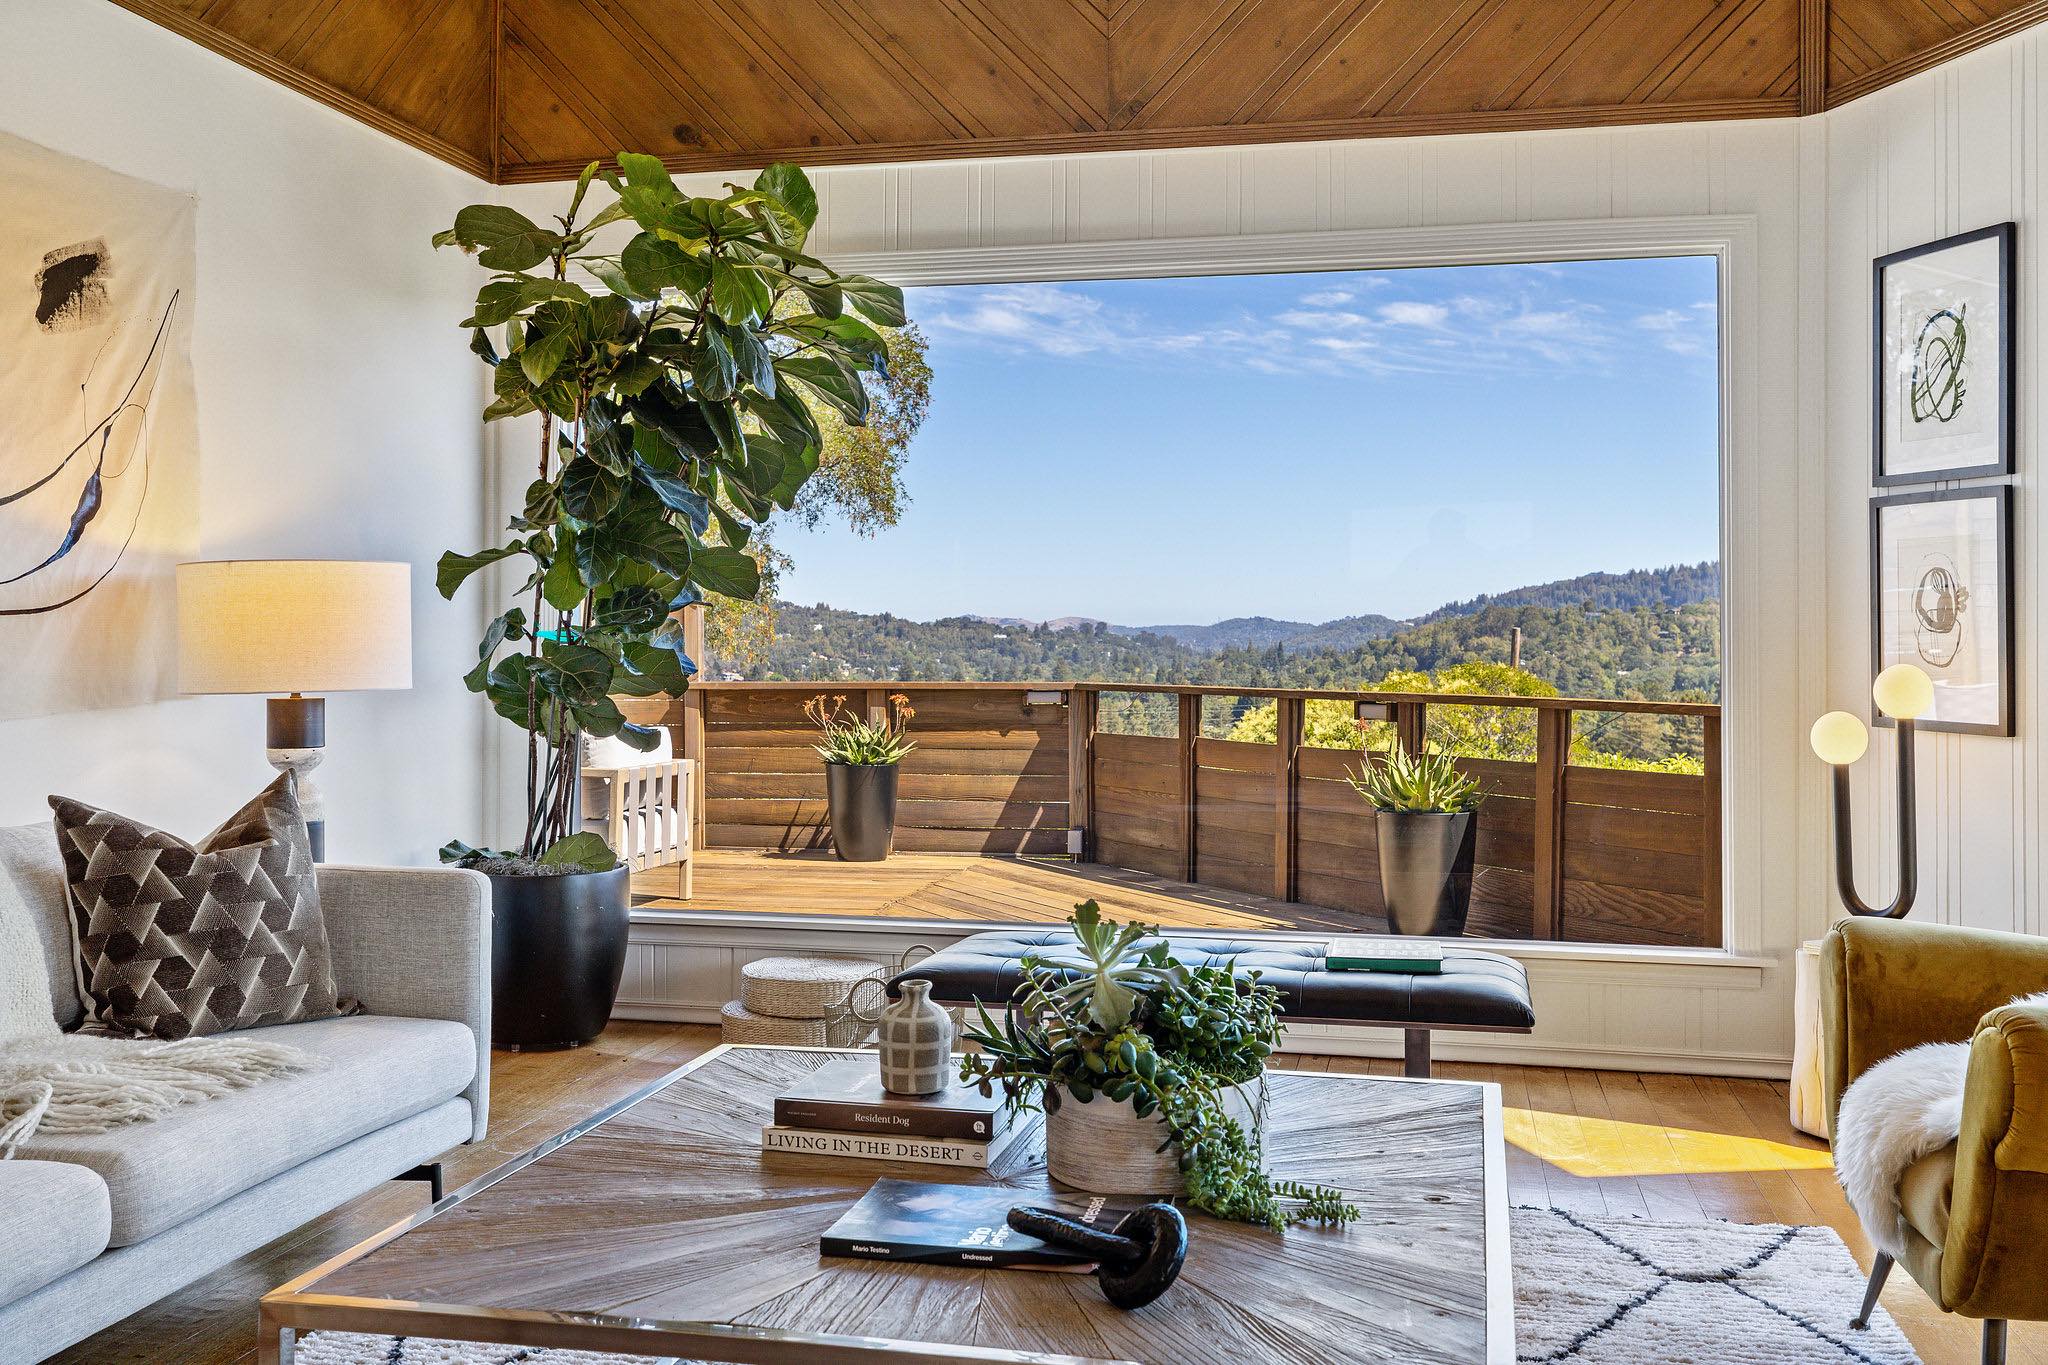 View of 15 Skyline Road, in Marin County sold via agent Chris Glave